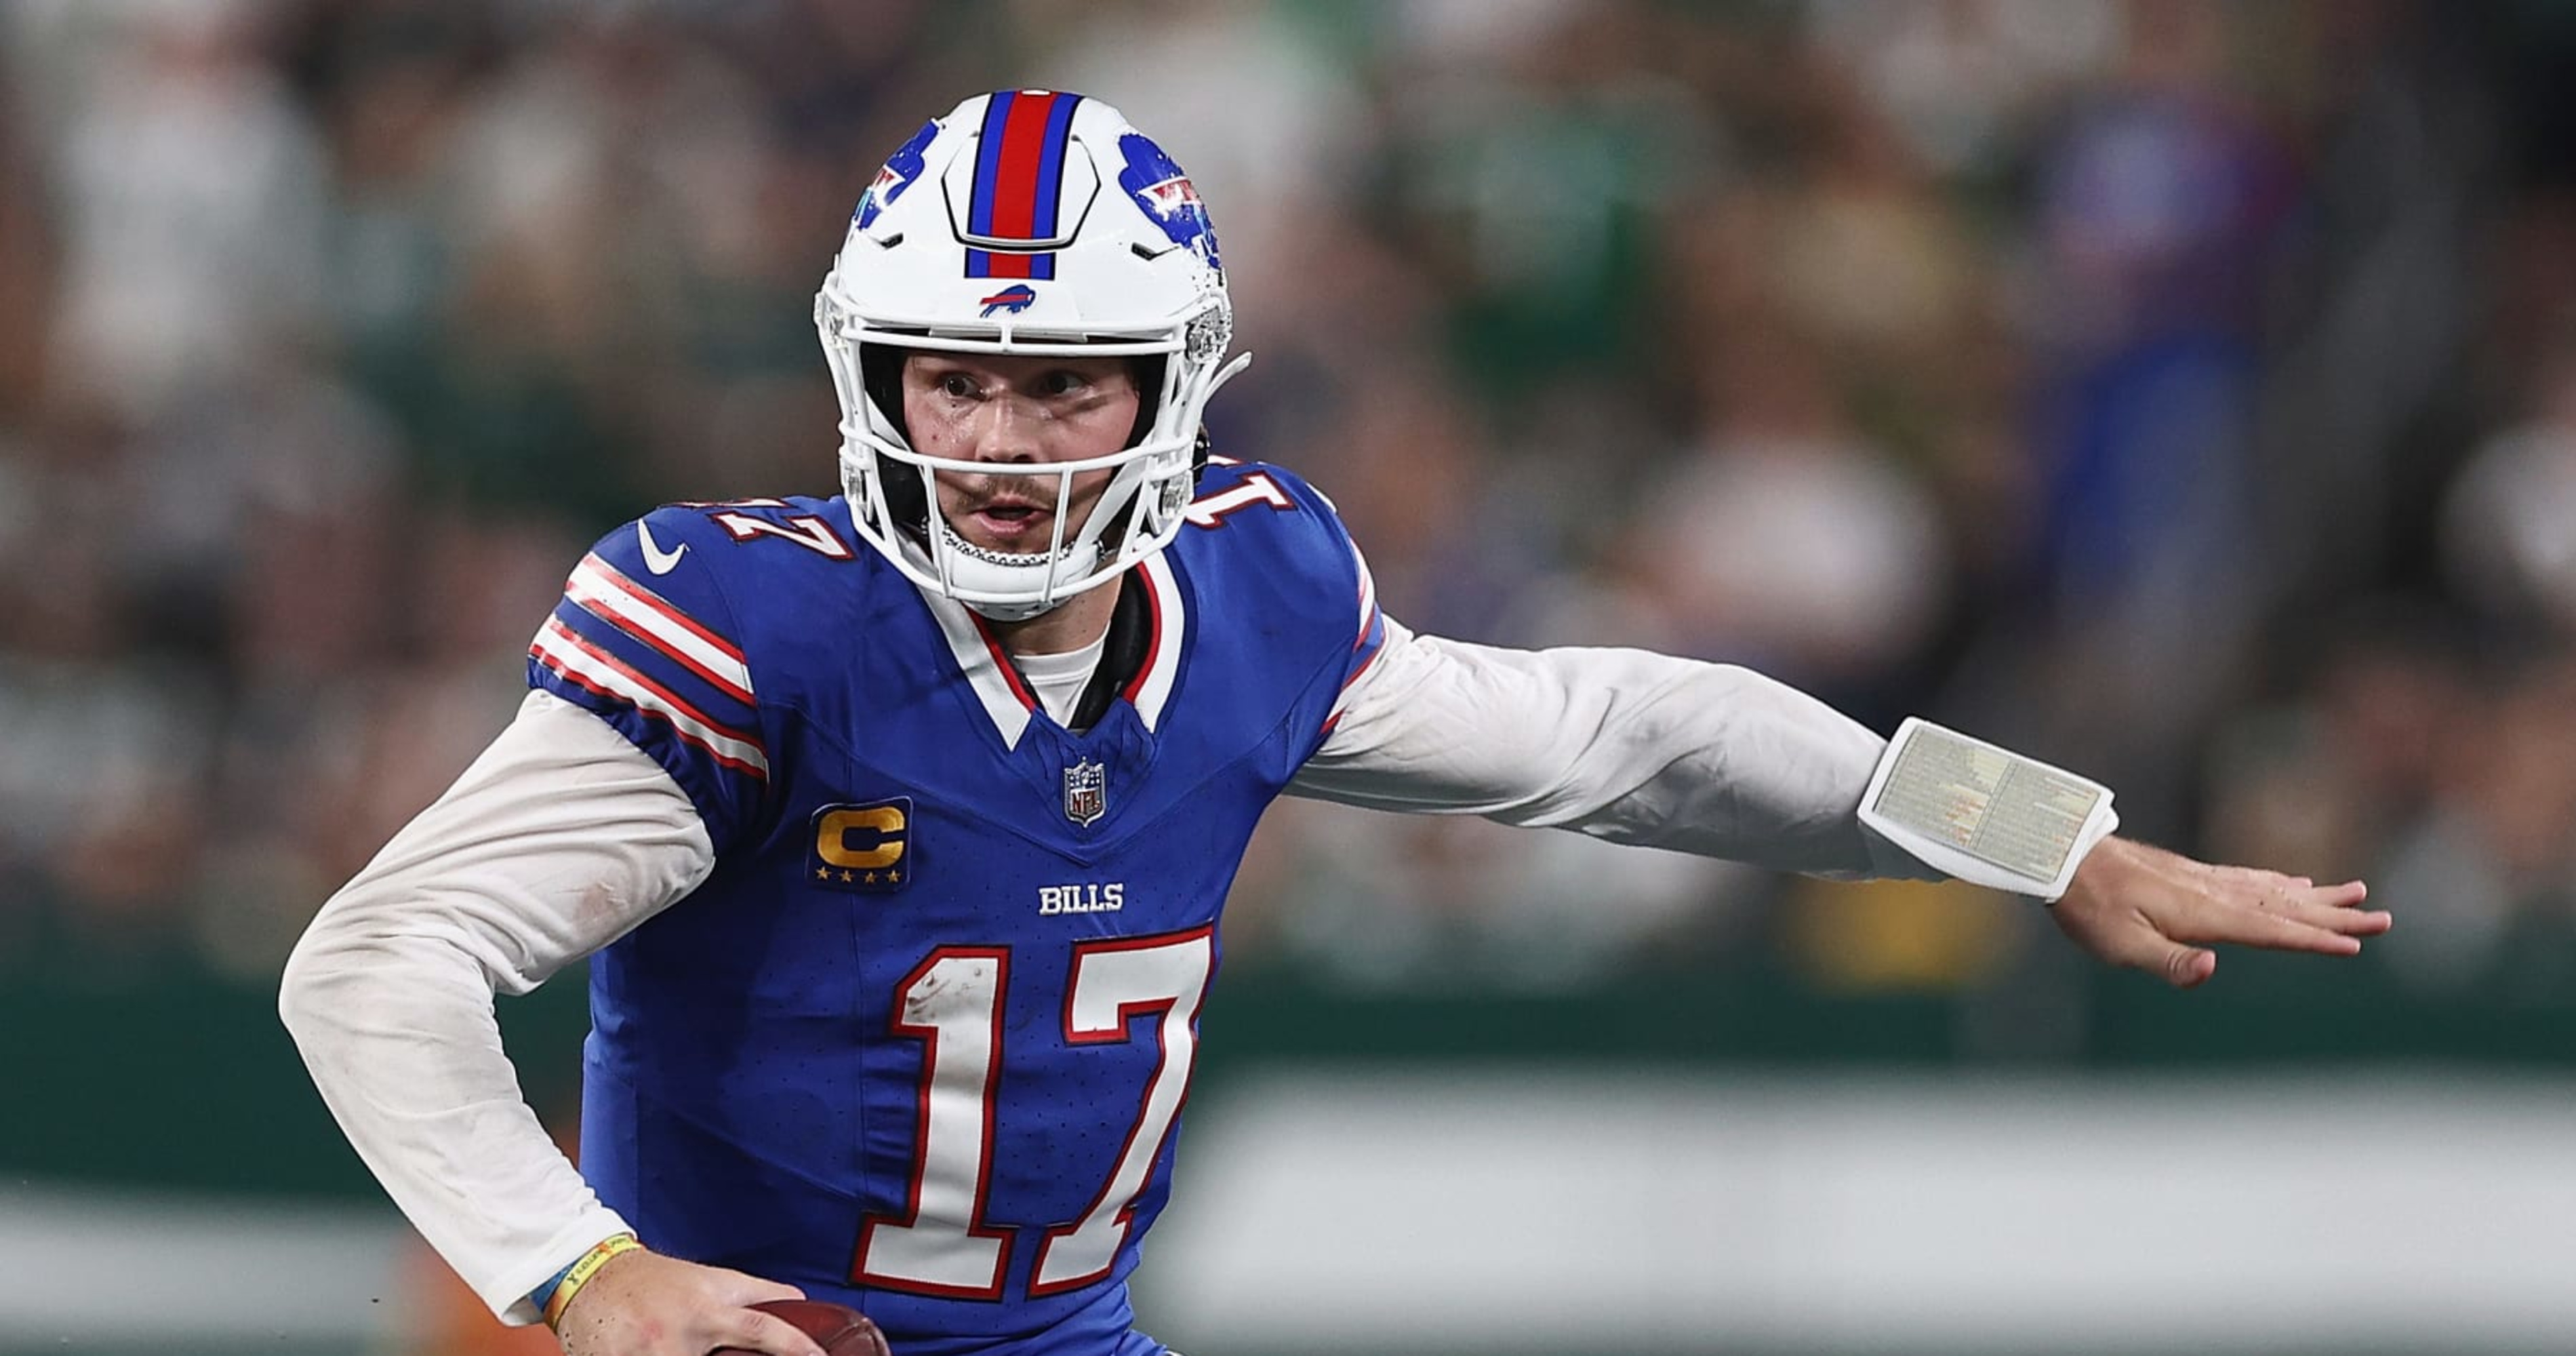 Jets 22, Bills 16 in OT  Game recap, highlights + stats to know